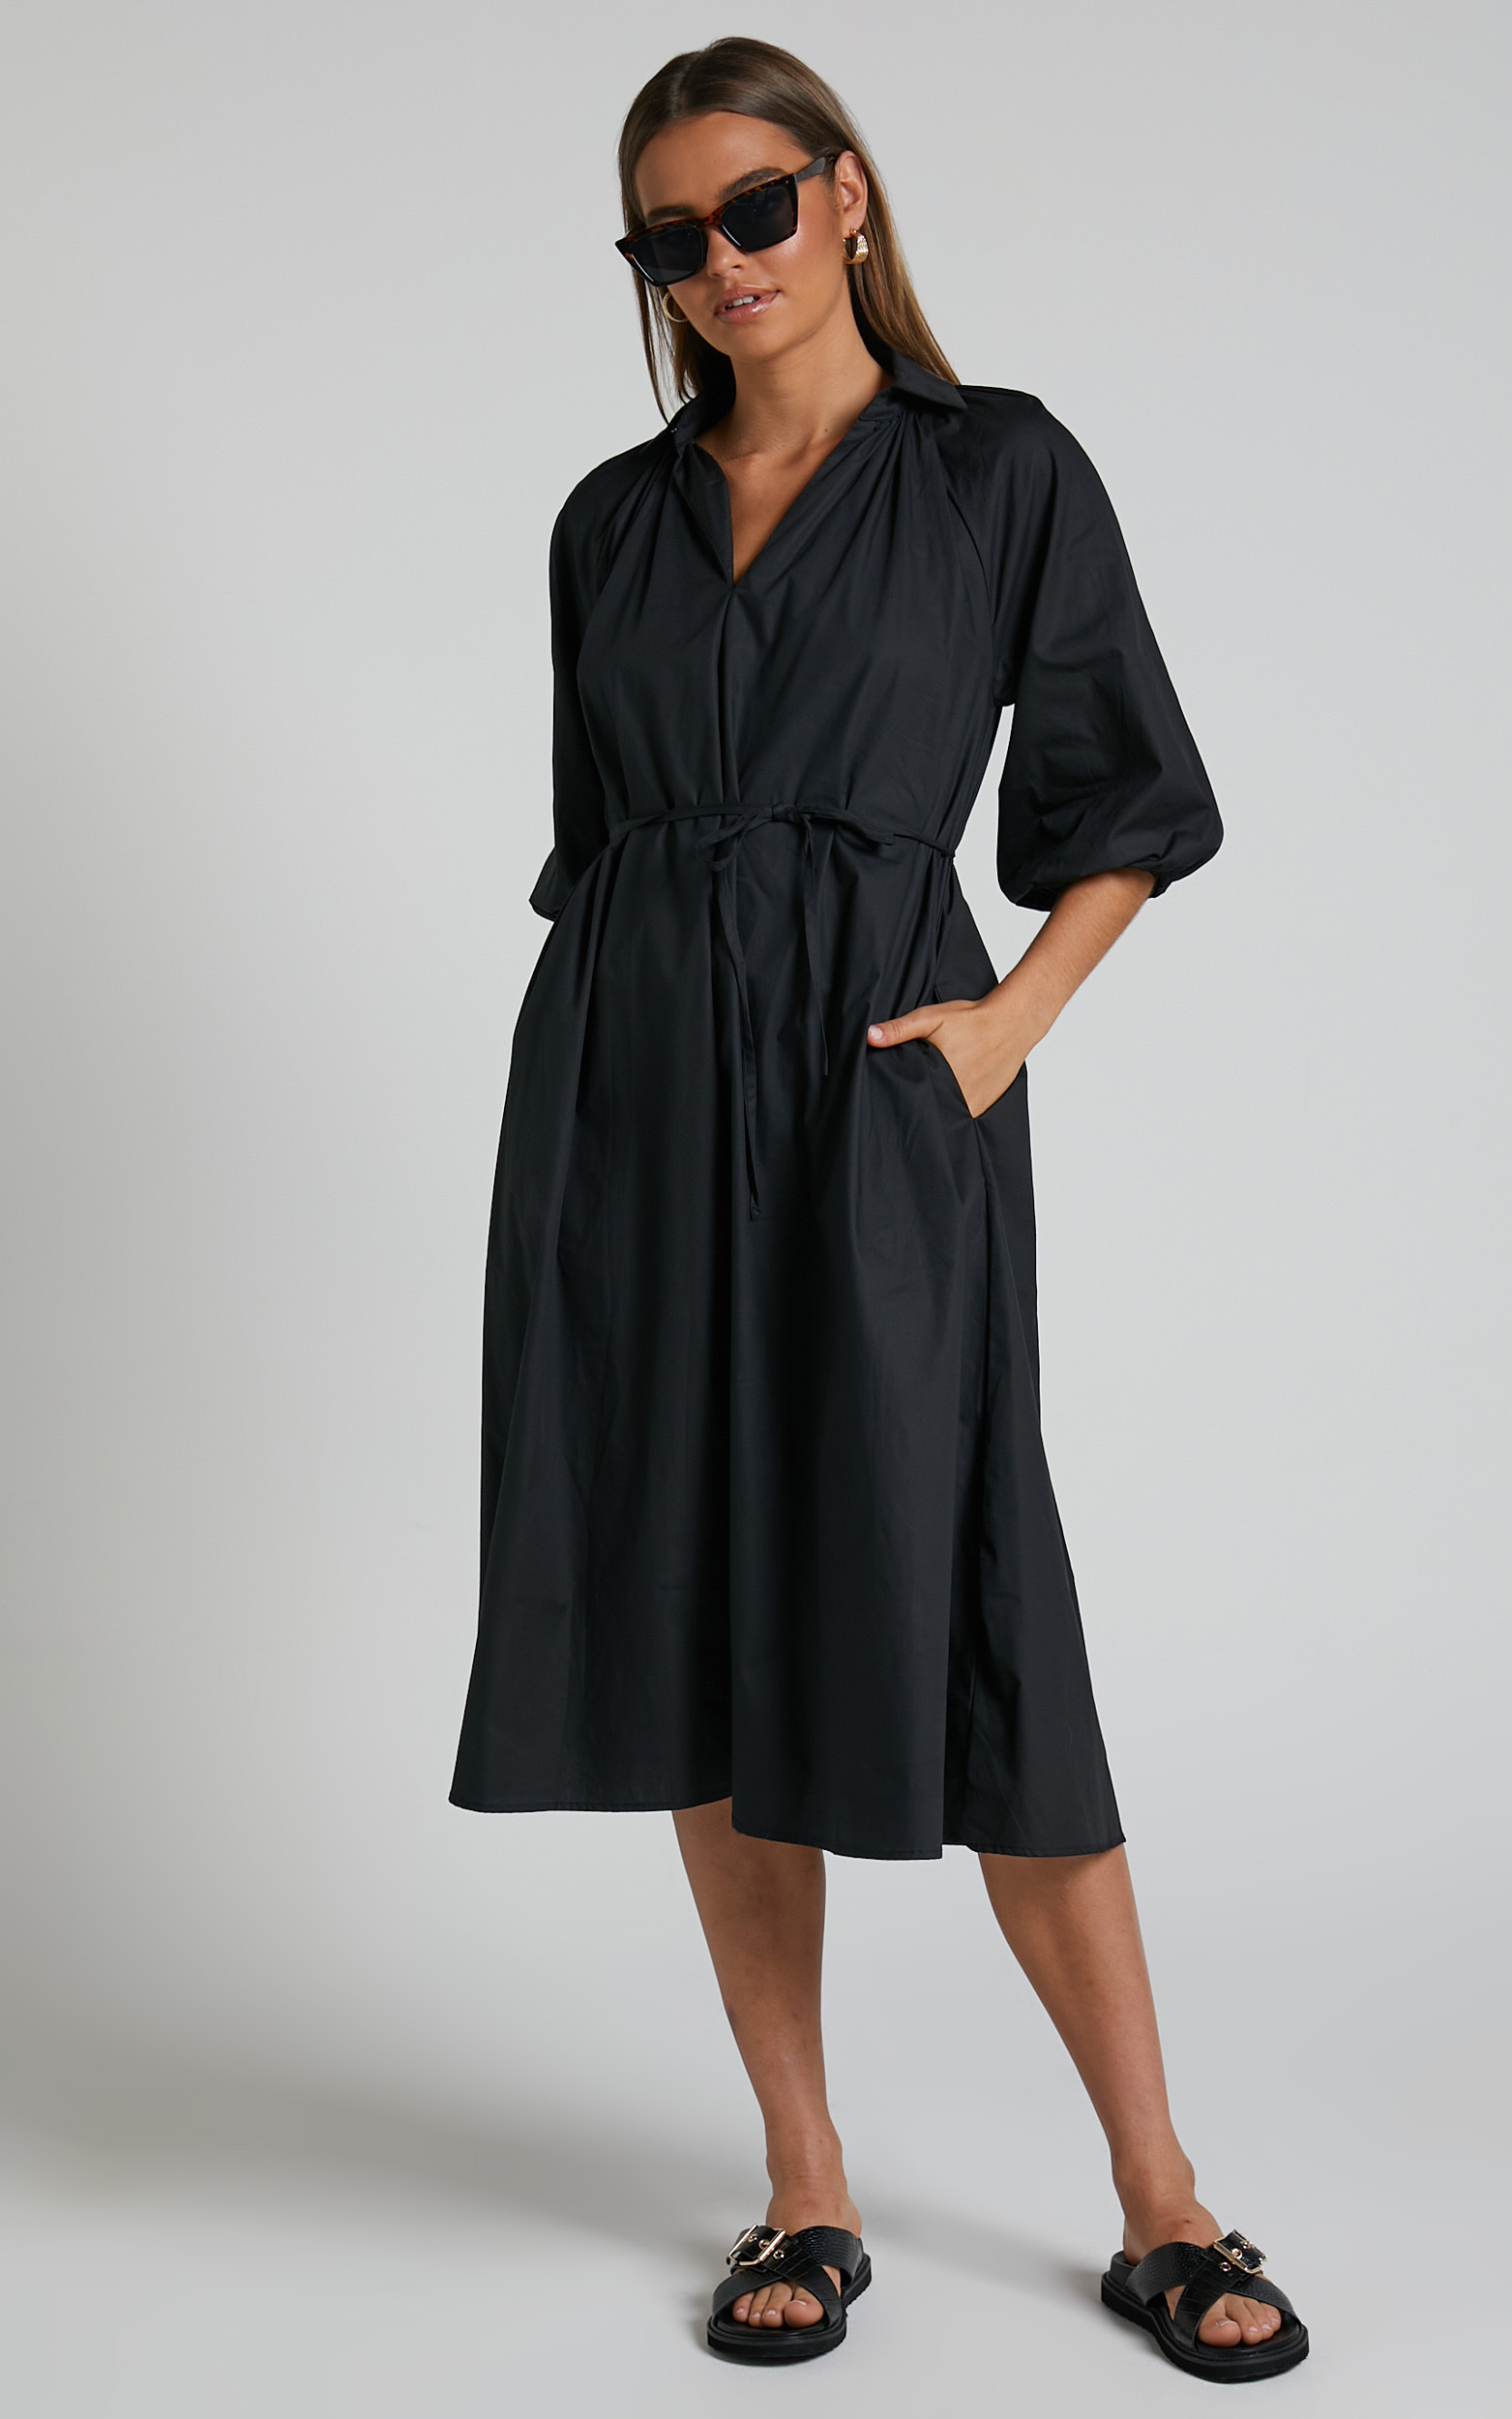 Simone Long Sleeve Wrap Midid Dress in Black - 06, BLK1, hi-res image number null